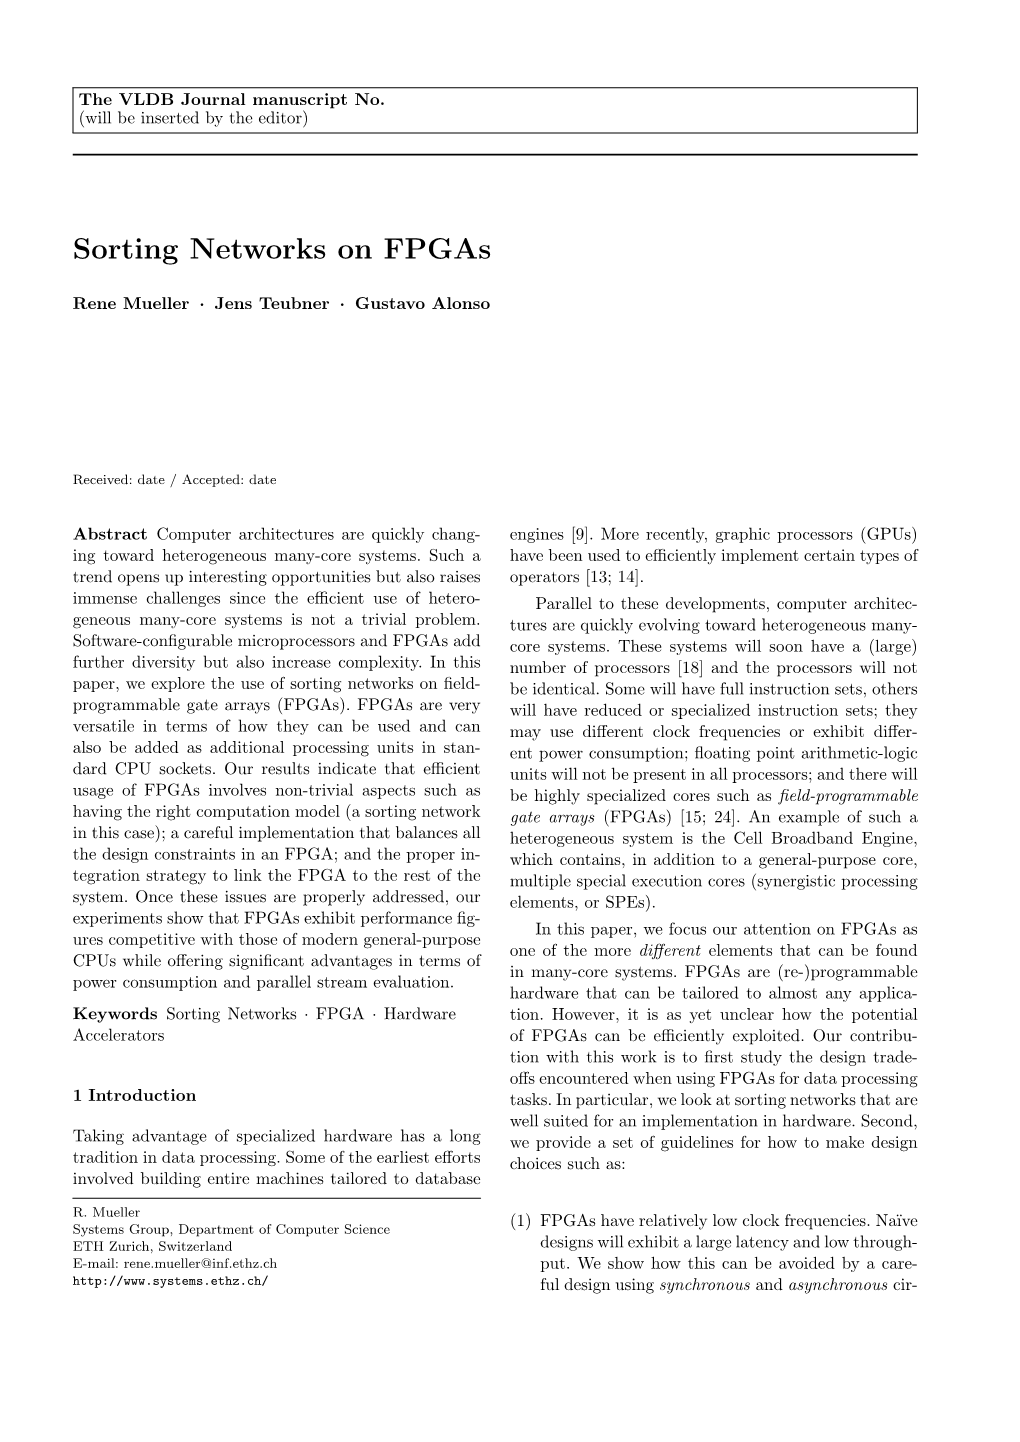 Sorting Networks on Fpgas